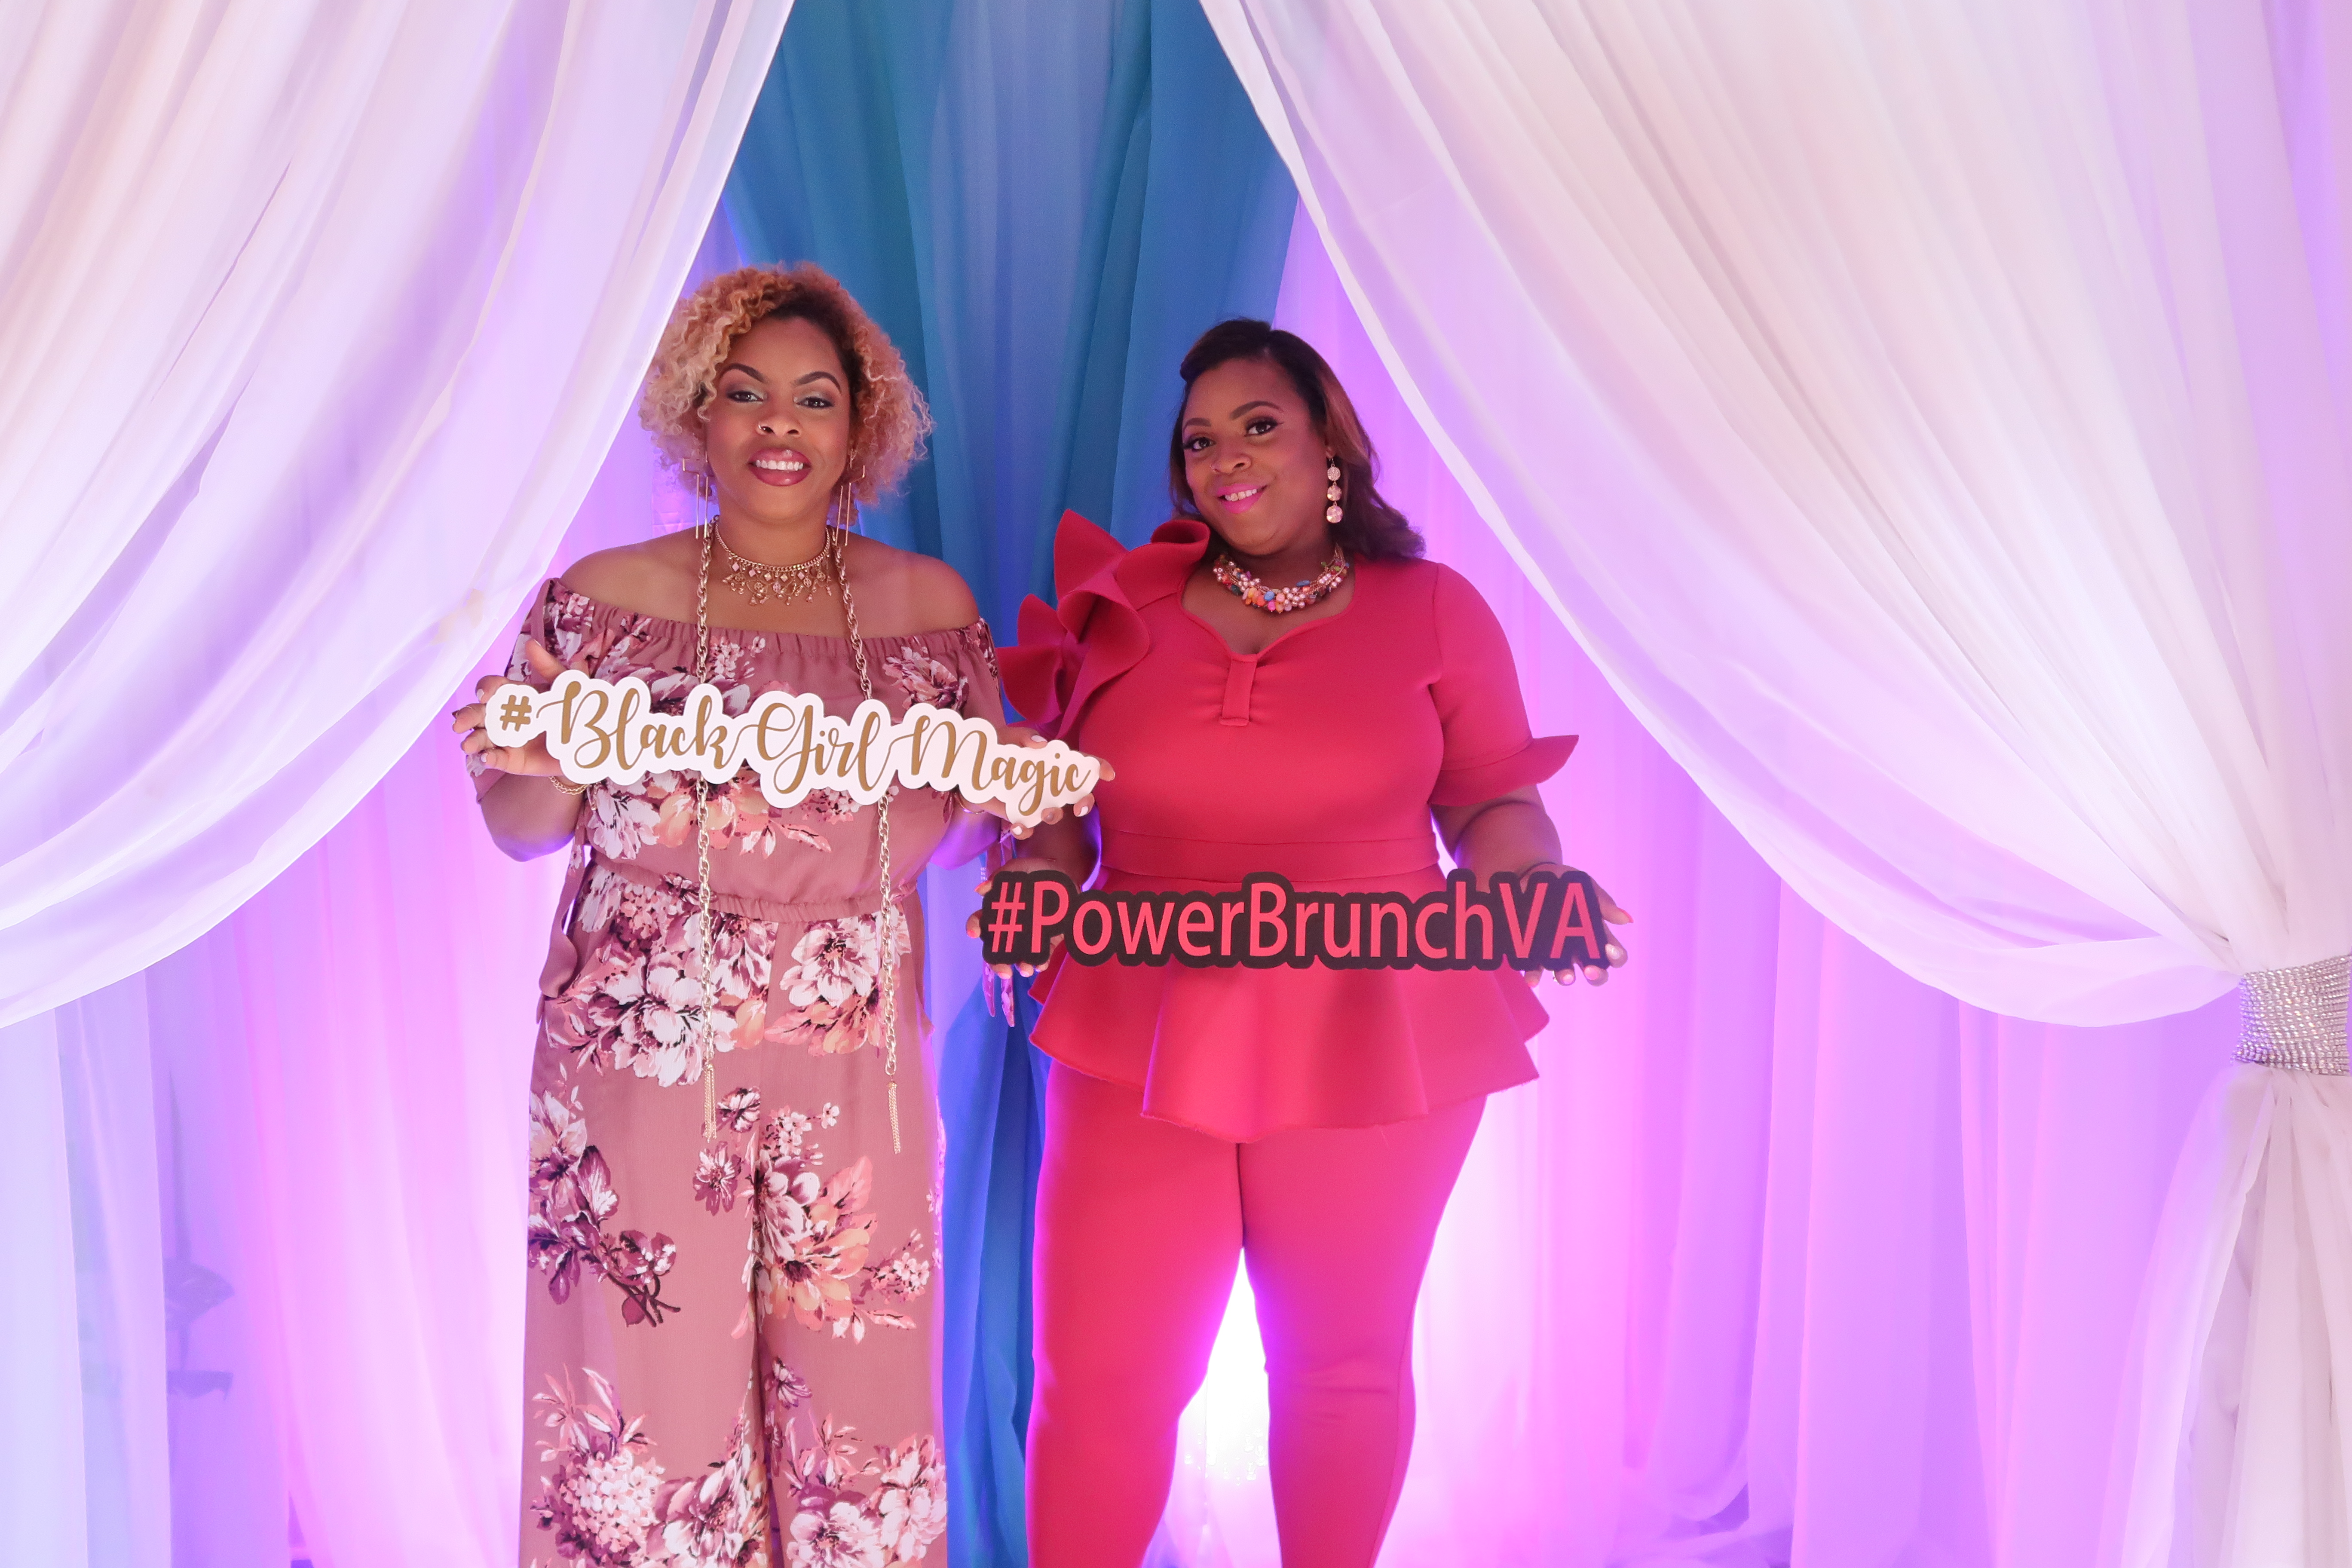 5th Annual Power Brunch VA Brings Hampton Roads’ Women Together to Benefit Breast Cancer Awareness